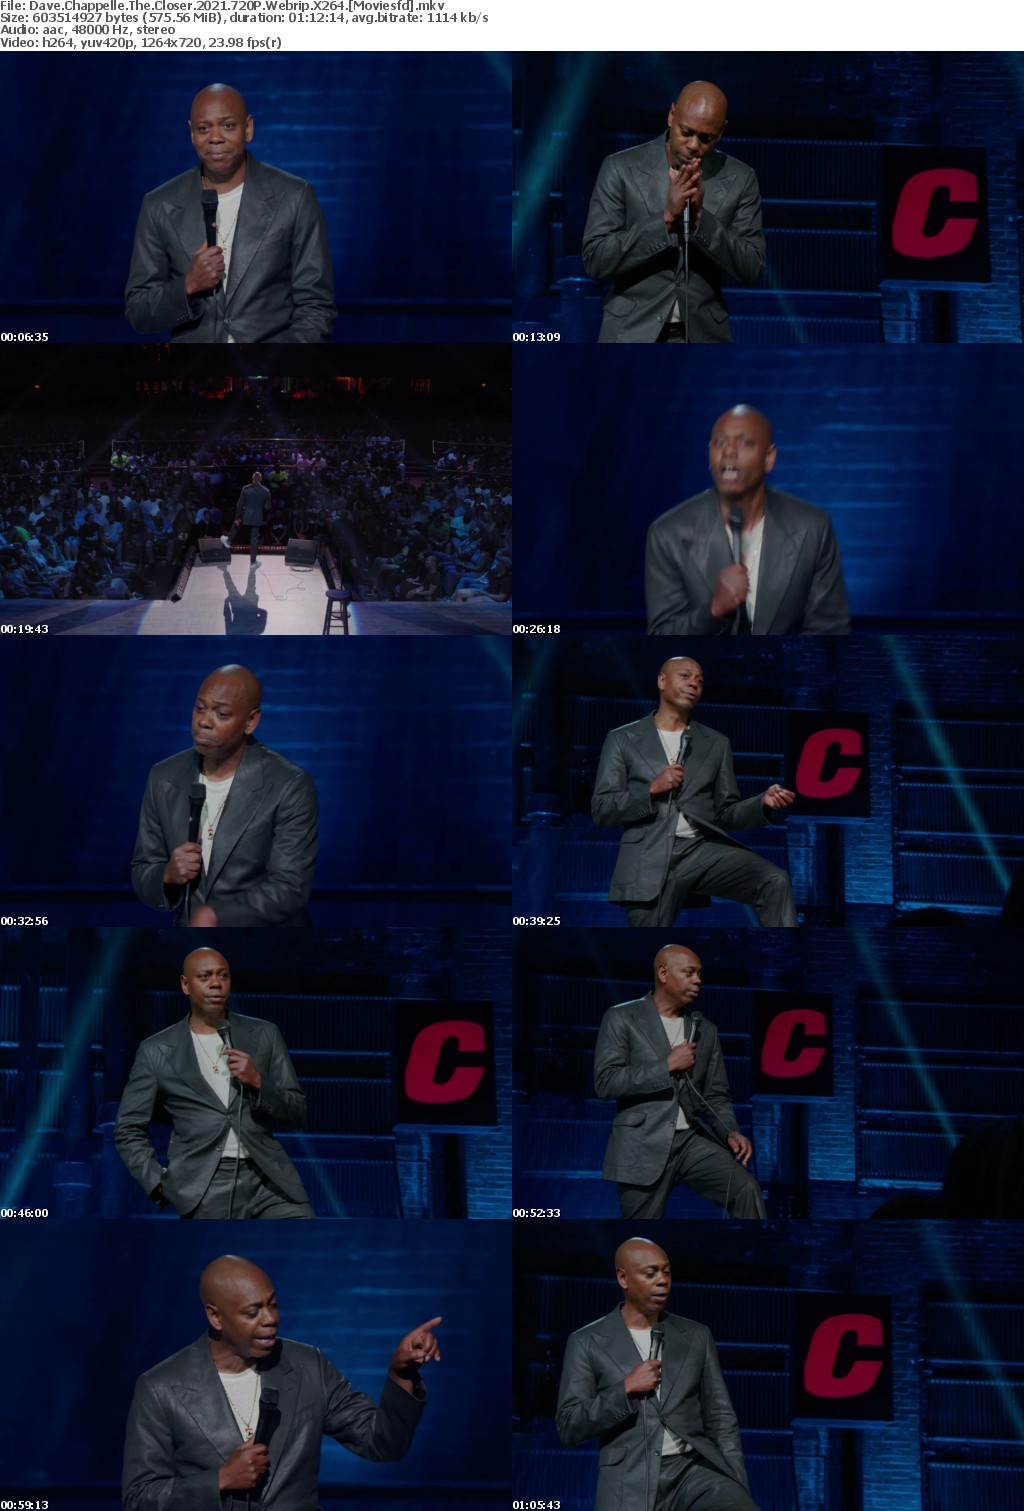 Dave Chappelle The Closer (2021) 720P WebRip x264 - MoviesFD